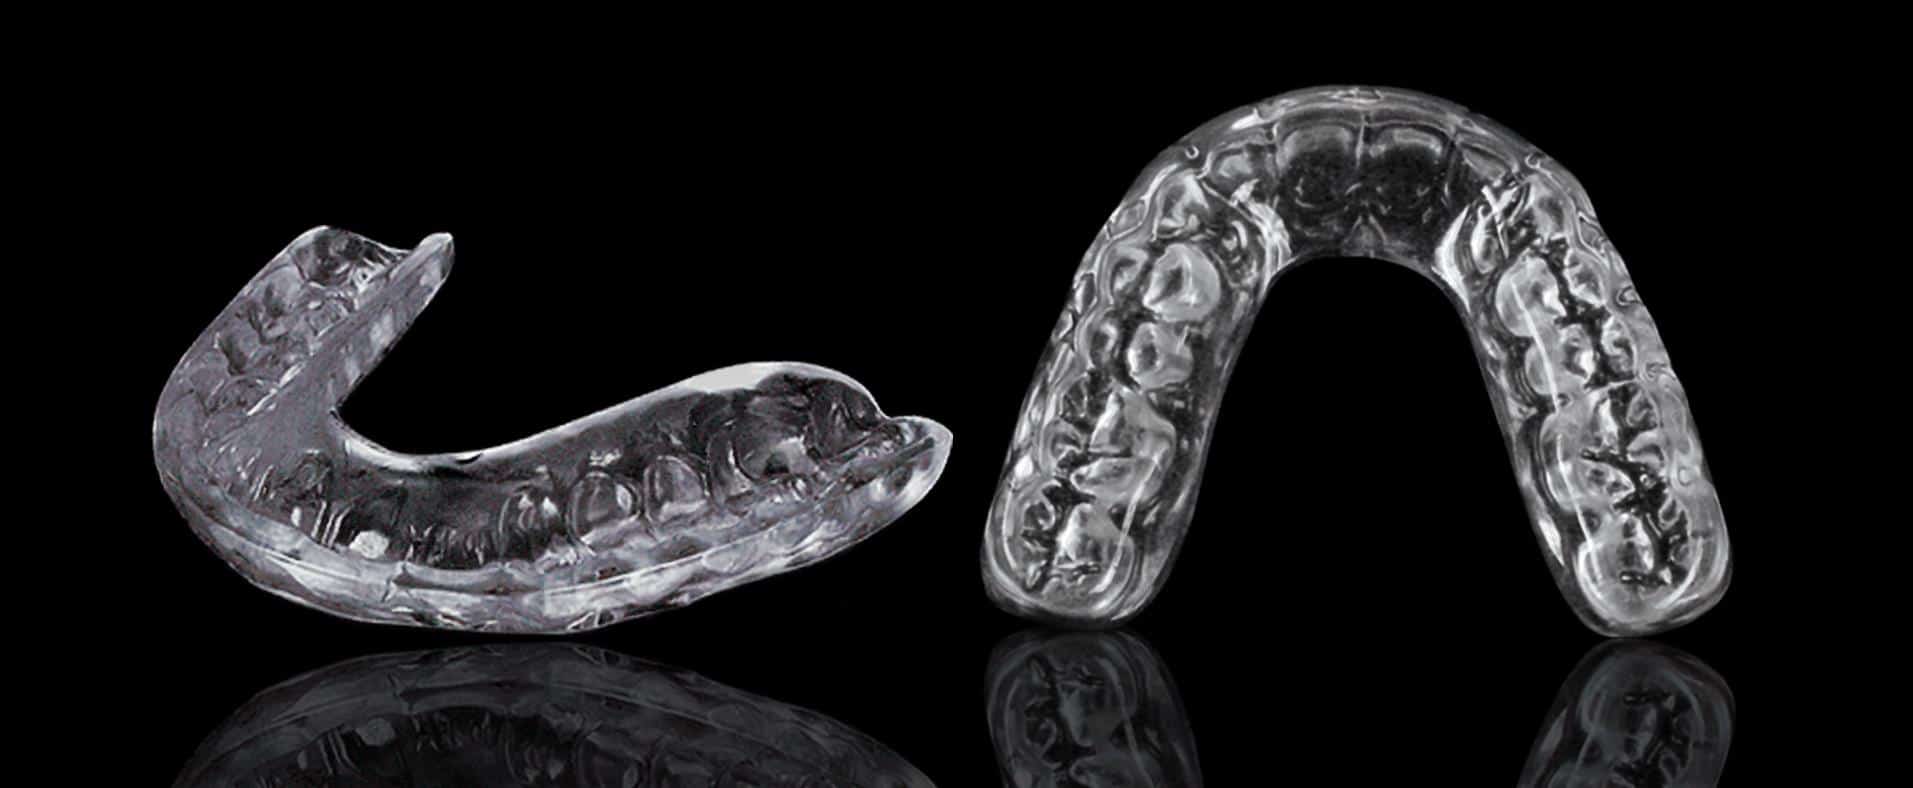 occlusal guard, tmj mouth guard, & night guard are not definitive treatment for tmj disorder